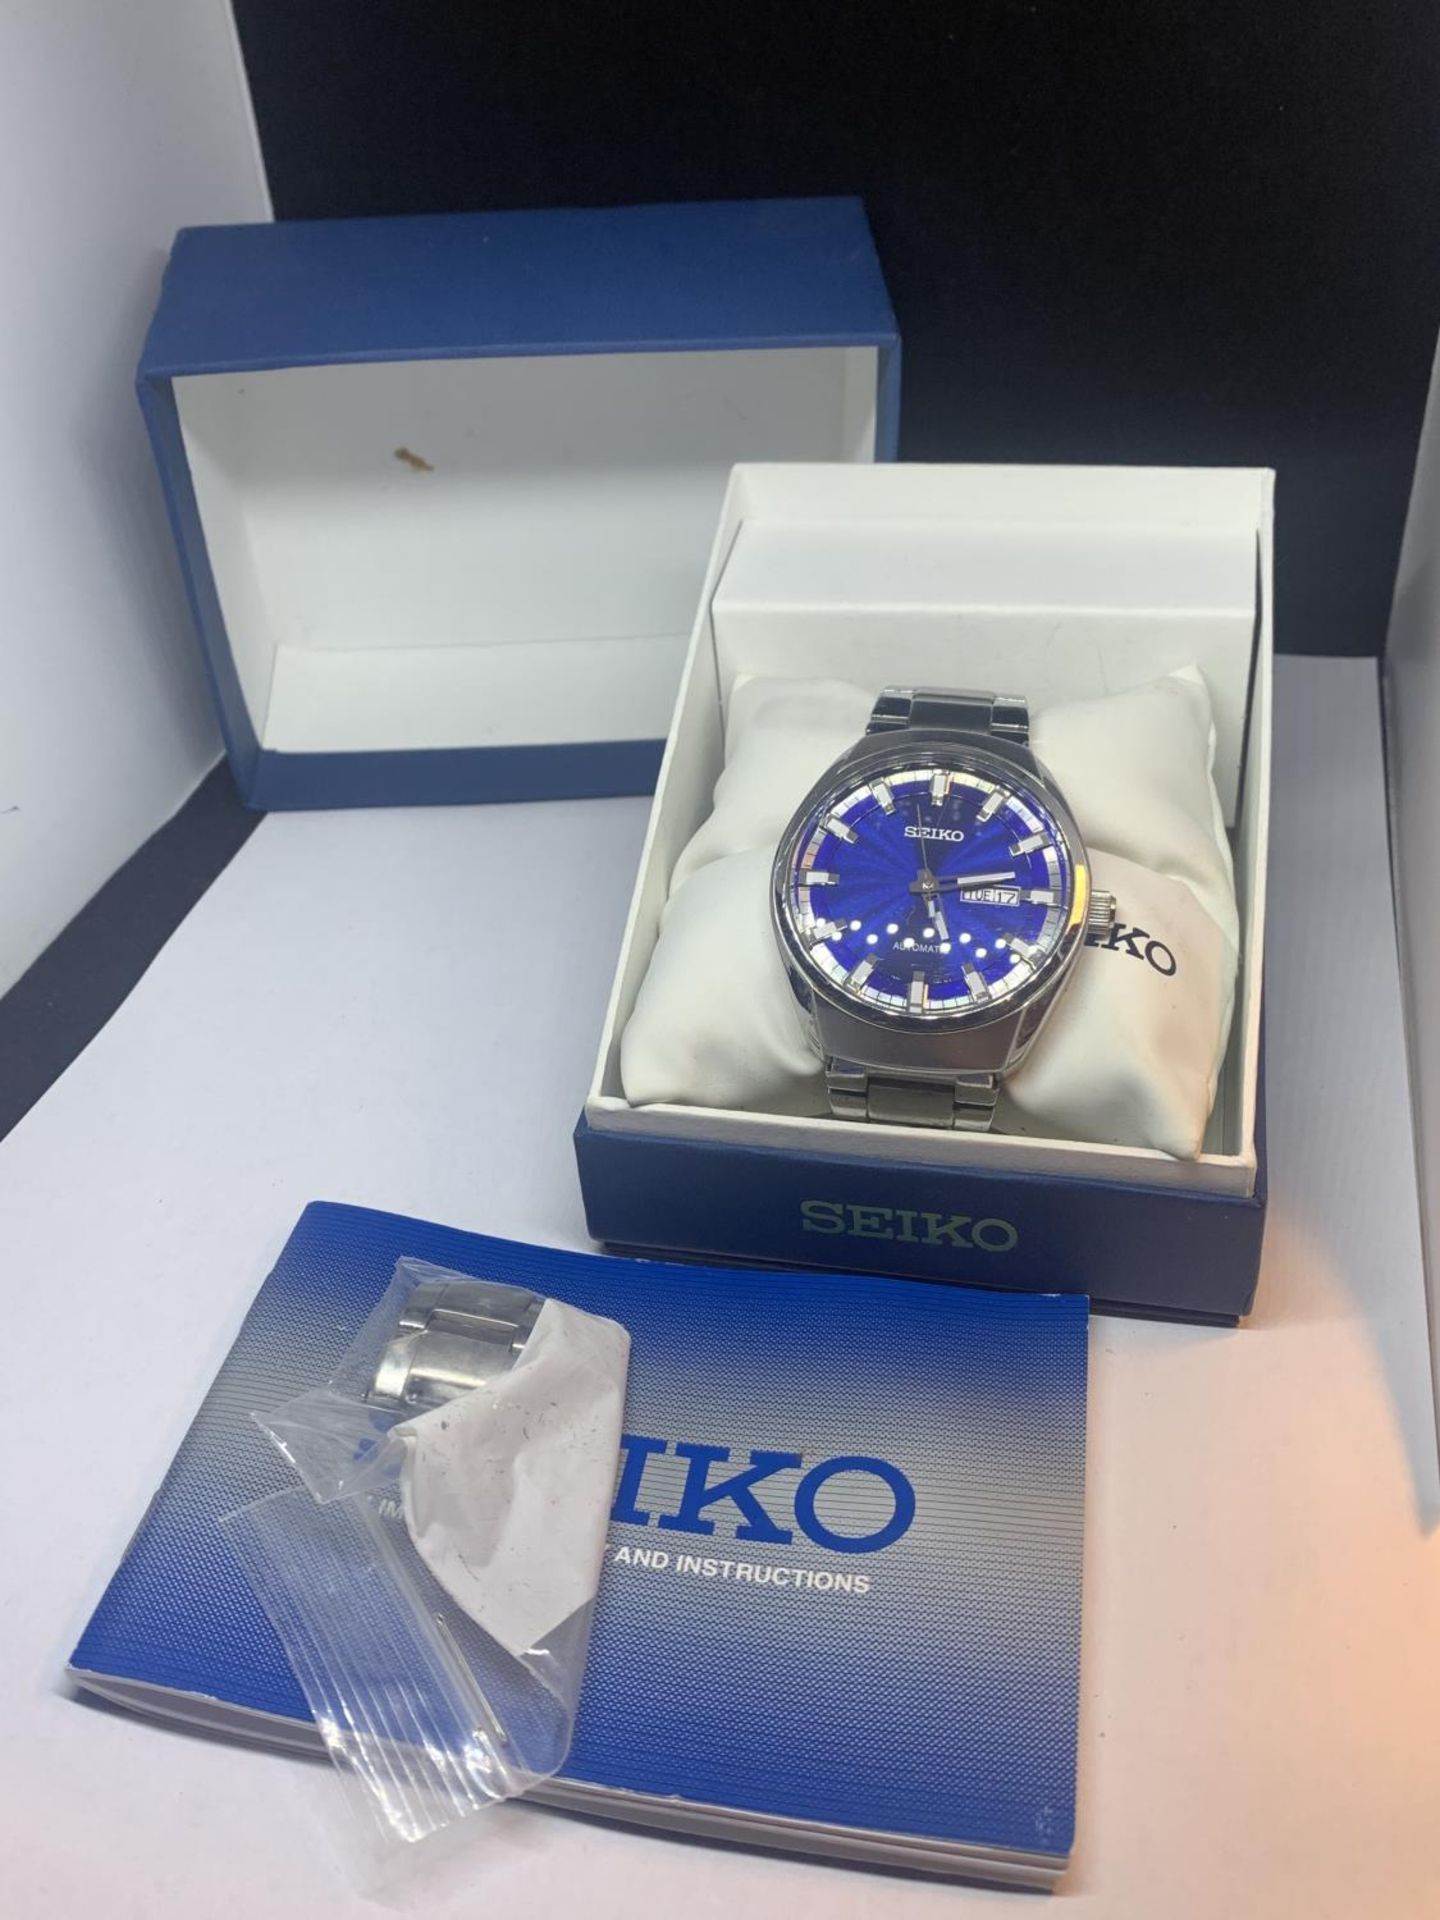 A BOXED SEIKO AUTOMATIC WRISTWATCH SEEN WORKING BUT NO WARRANTY - Image 3 of 3